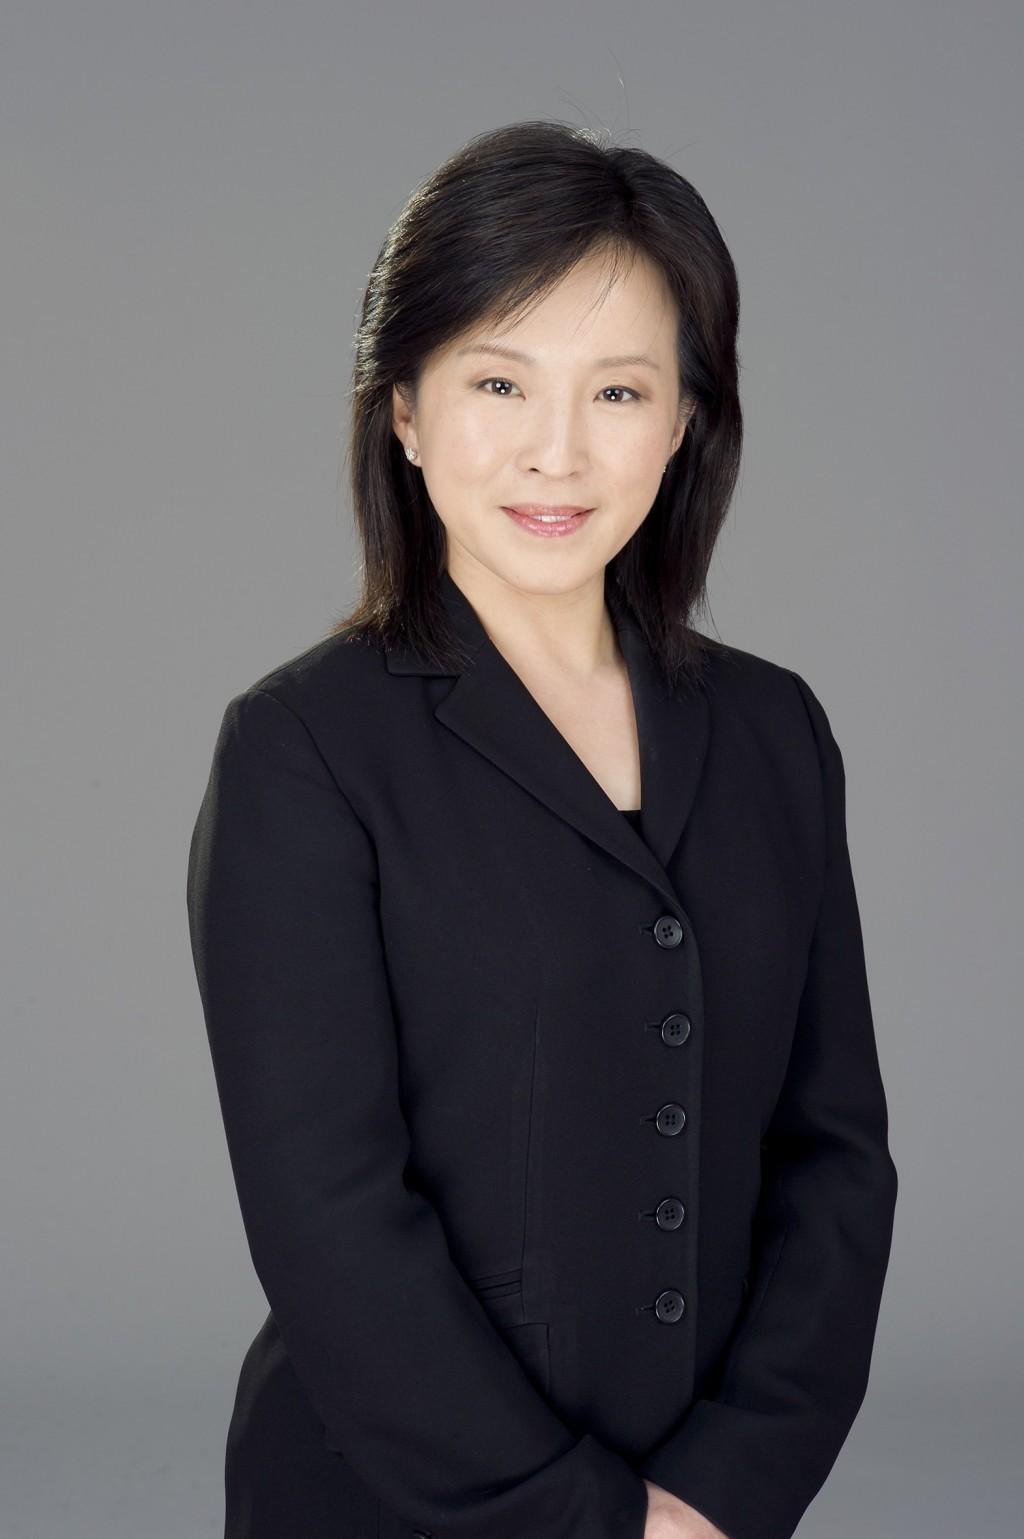 Conductor Chen Ying. (Courtesy of Shen Yun Performing Arts)